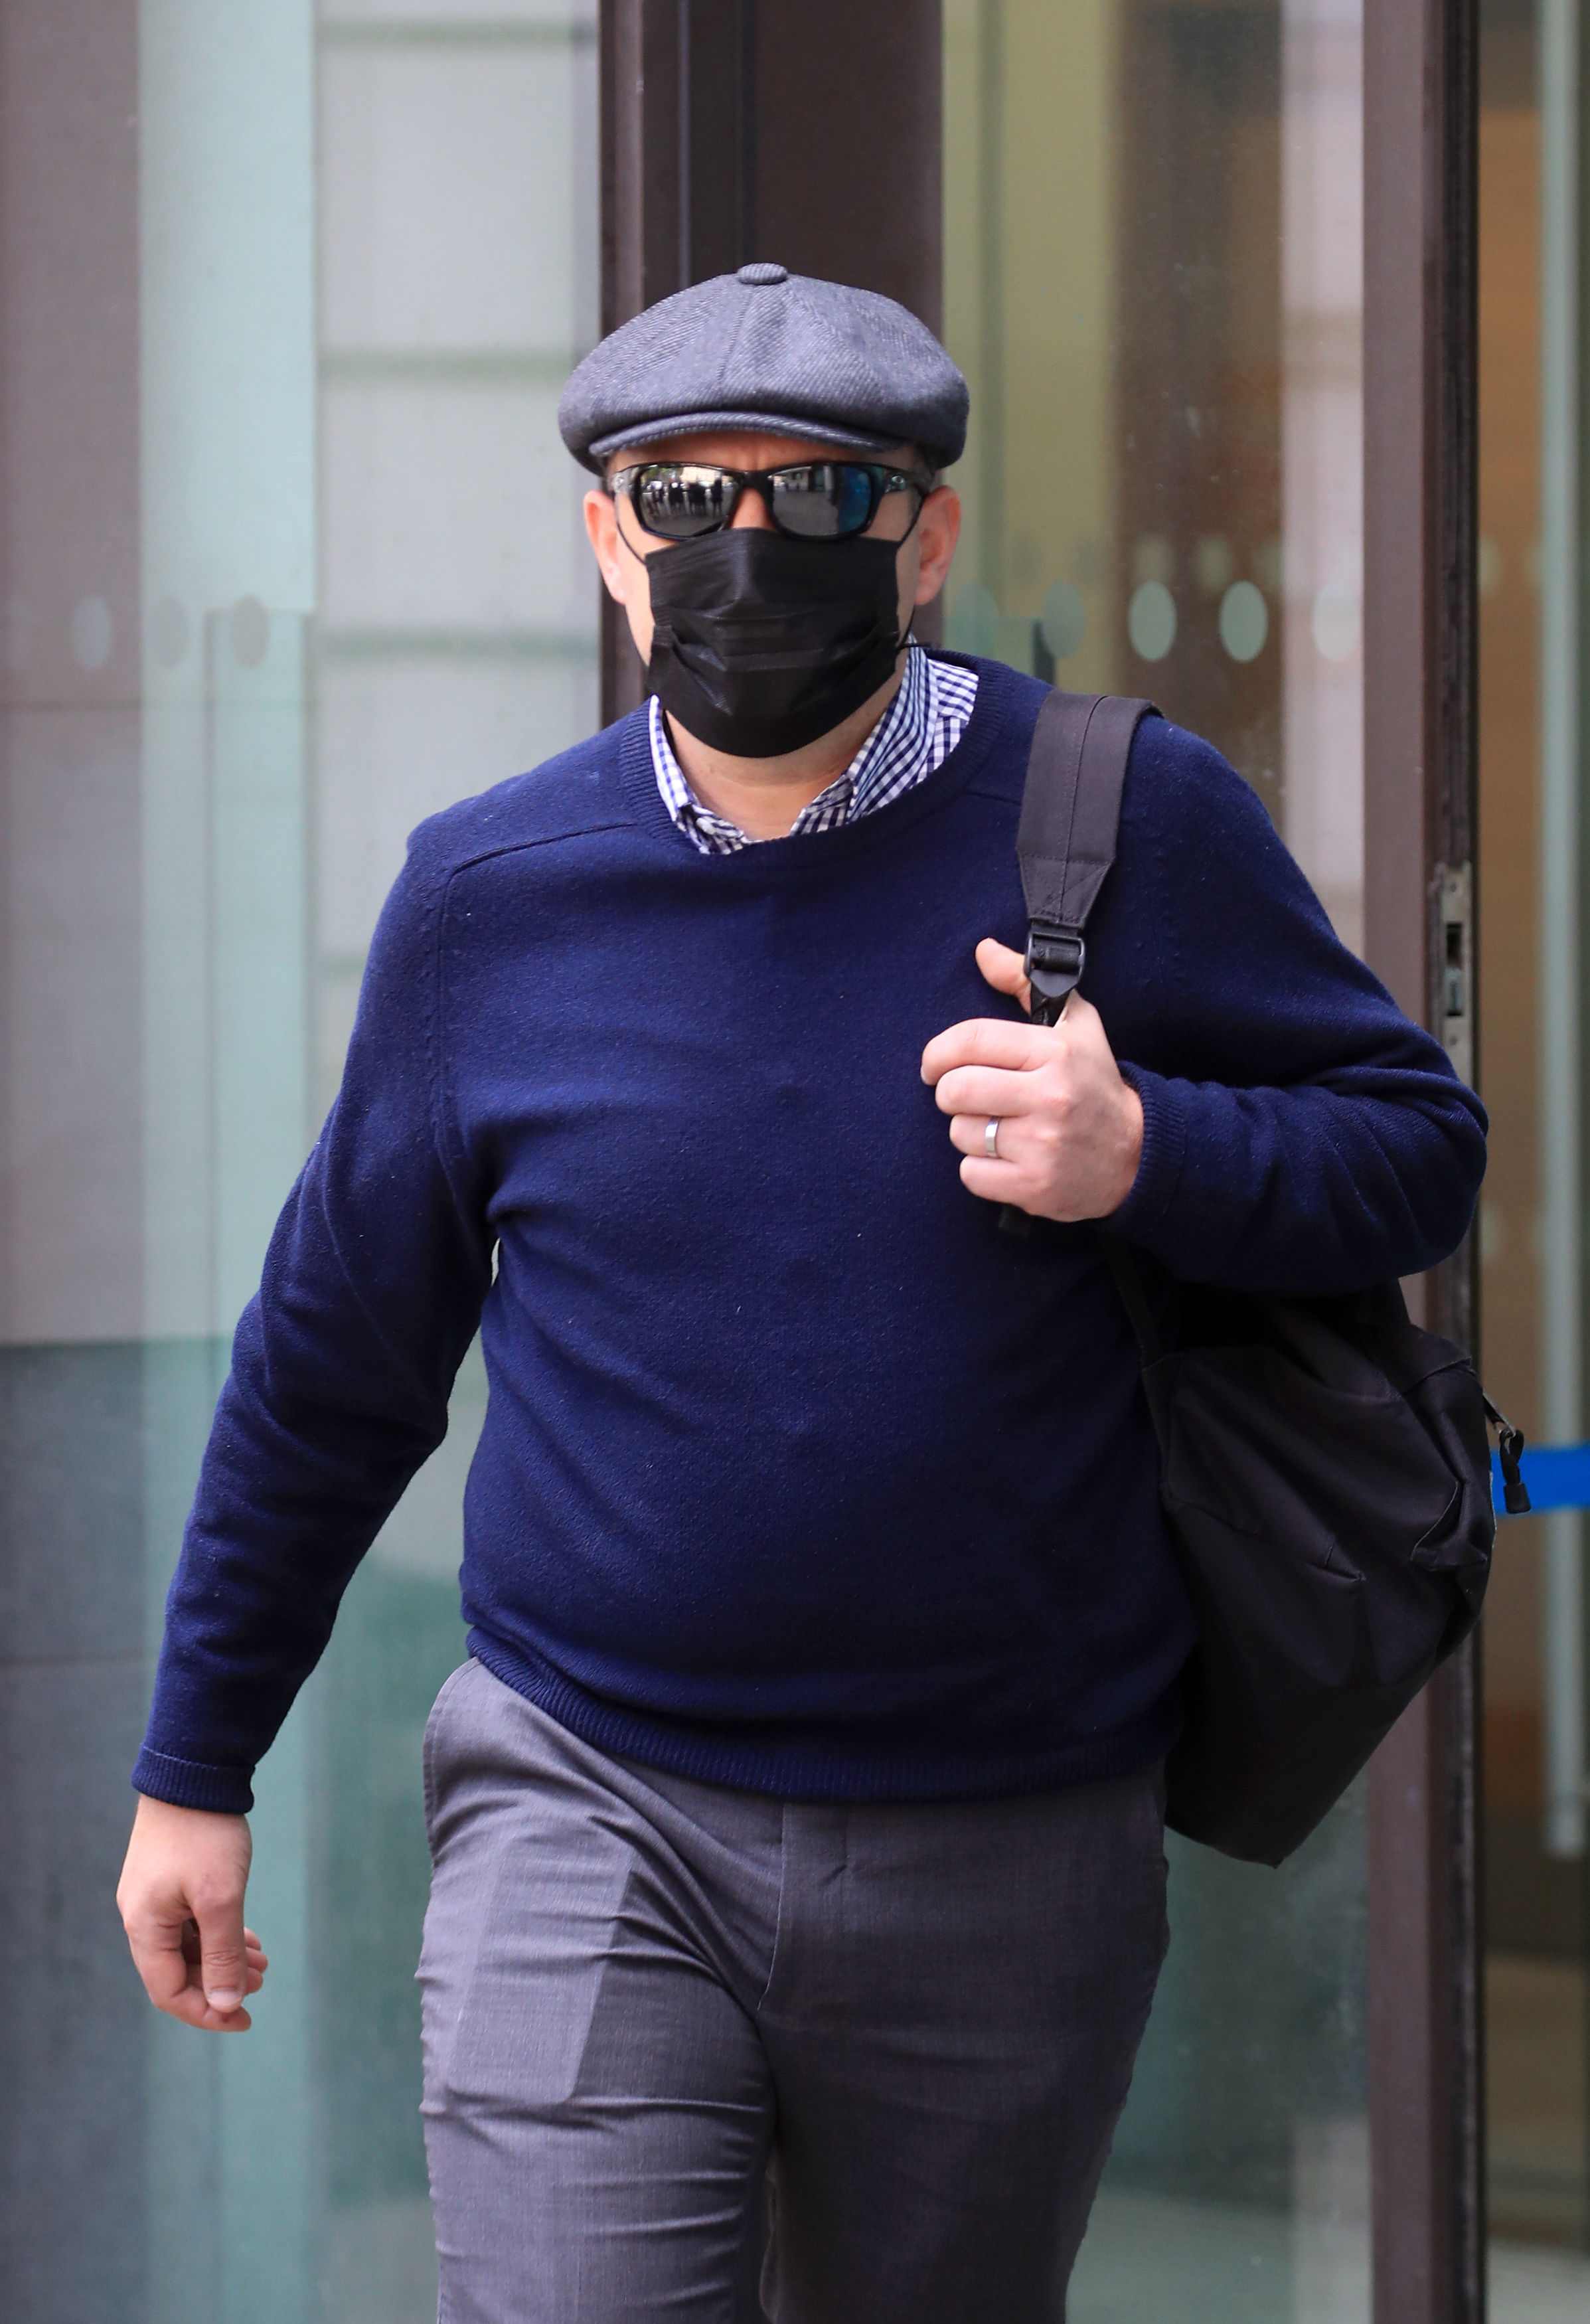 Pc Deniz Jaffer arrives at Westminster Magistrates Court, London, where he is appearing charged with misconduct in a public office. It is alleged that Pc Deniz Jaffer and Pc Jamie Lewis shared pictures of a double murder scene of sisters Nicole